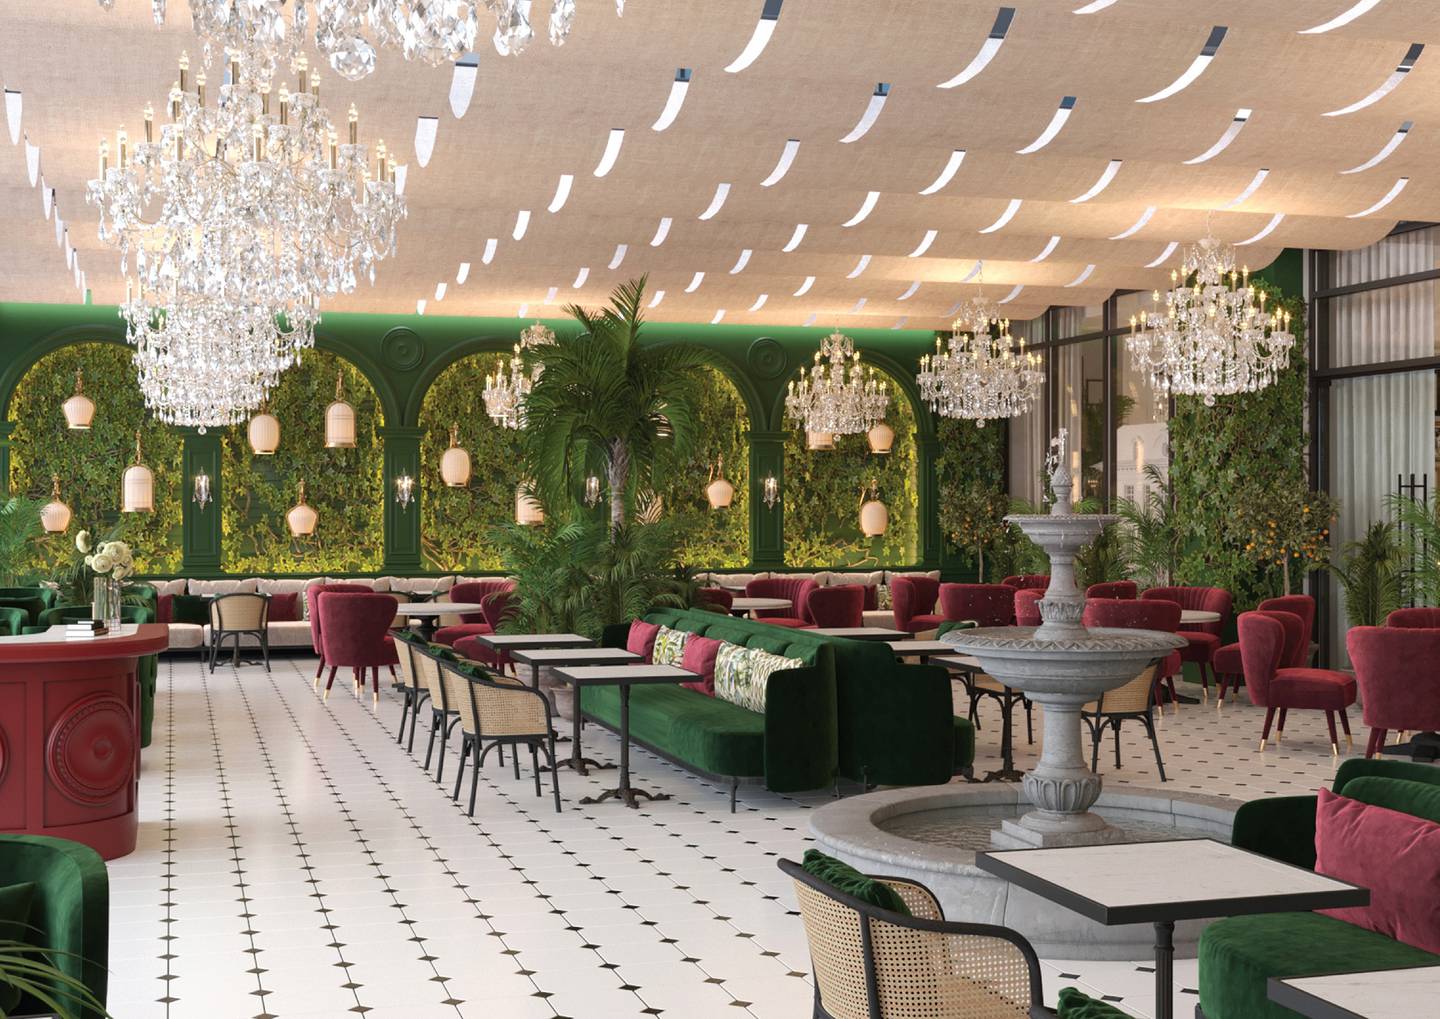 The new La Serre restaurants will be filled with lush plants and cool tones. Photo: La Serre